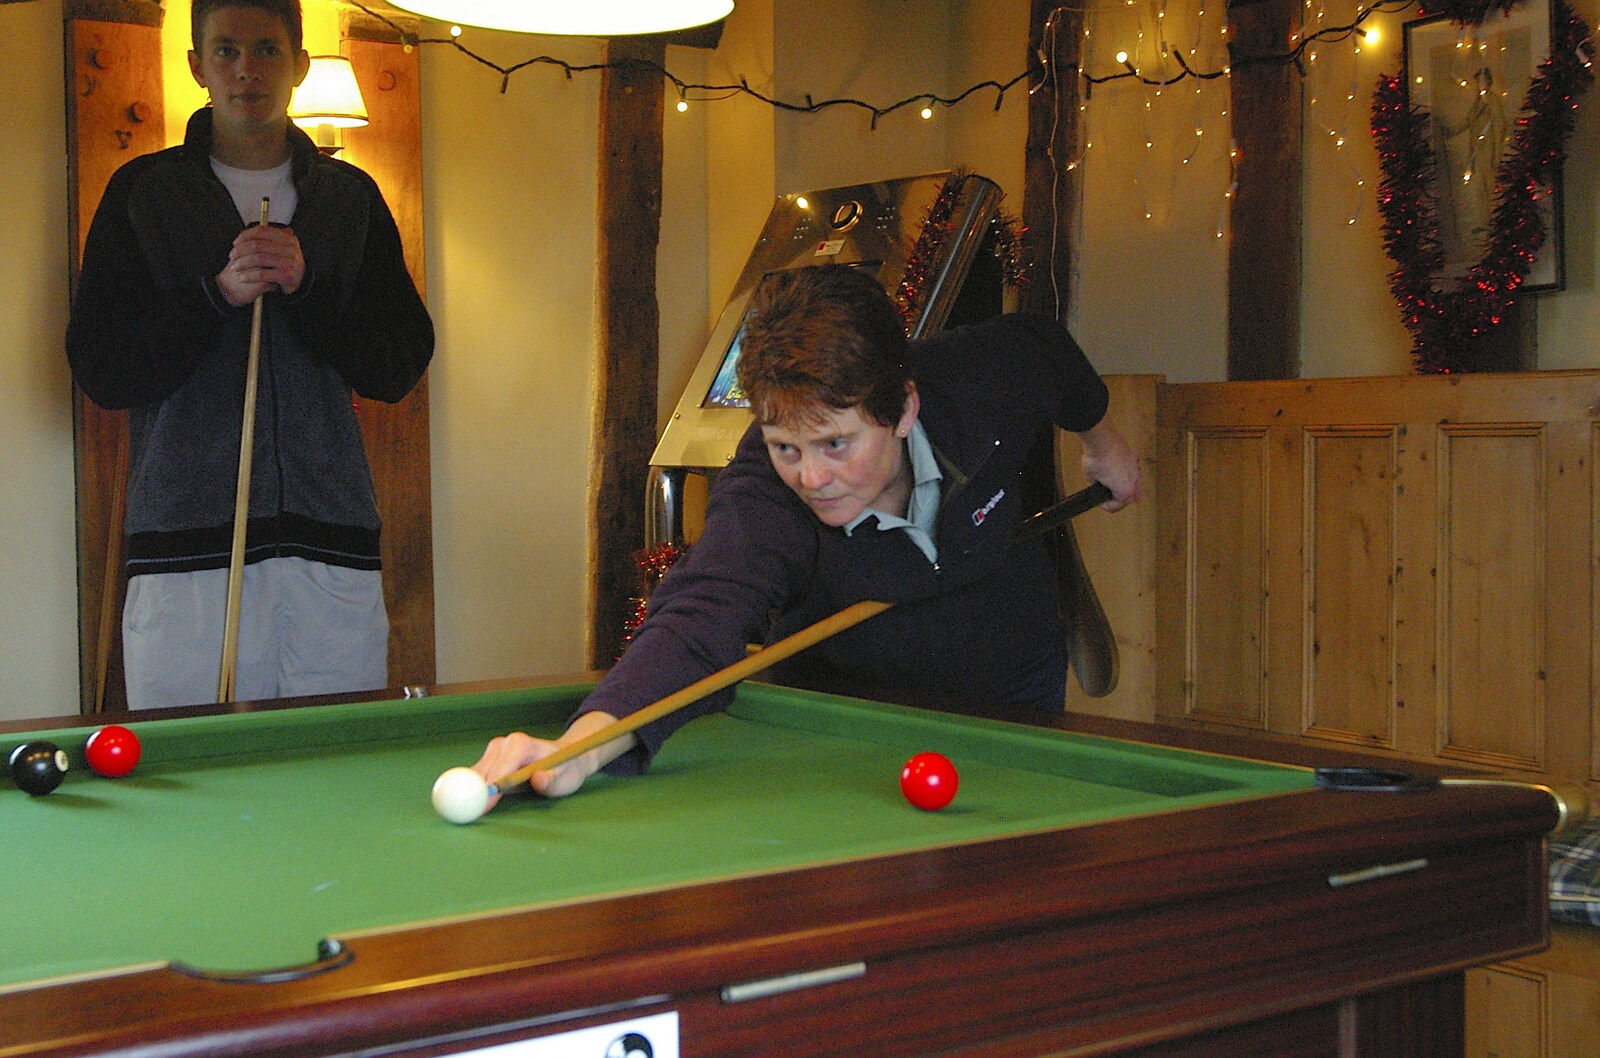 Pippa cues up from New Year's Eve and Day, Thorndon and Thornham, Suffolk - 1st January 2006